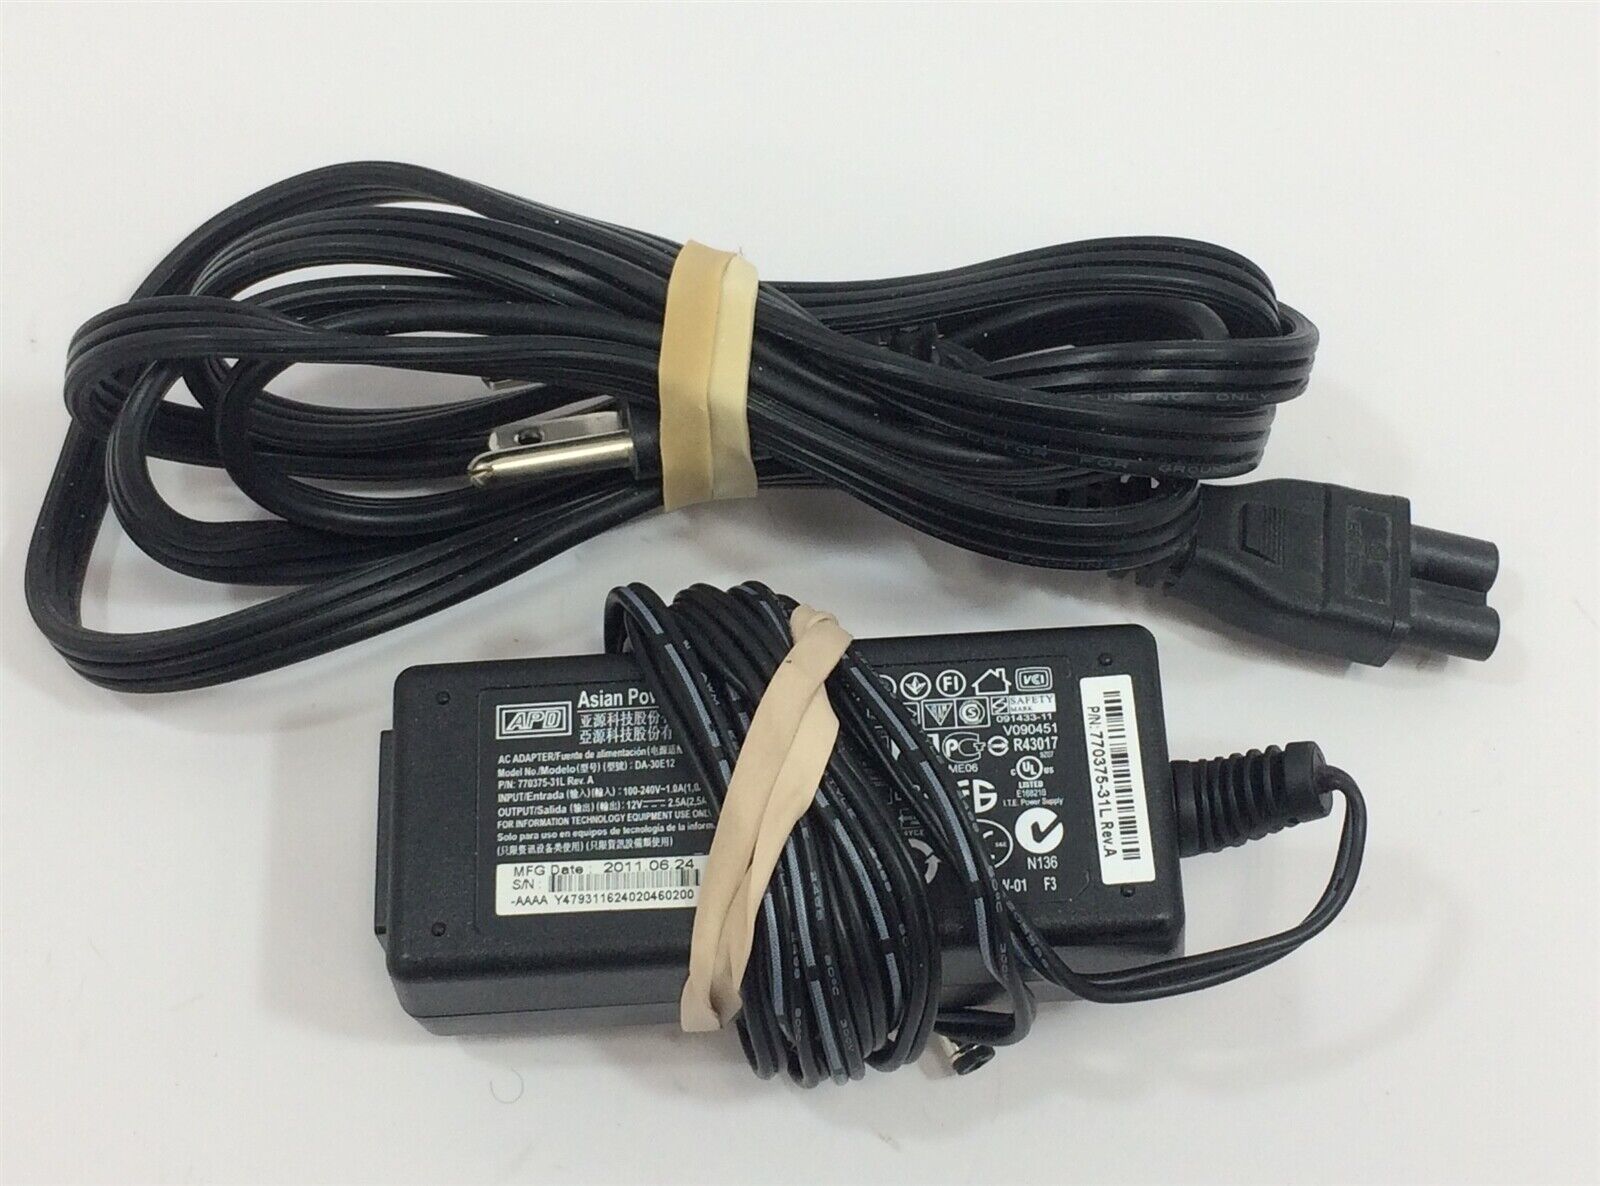 *Brand NEW*APD 12V 2.5A AC Adapter DA-30E12 for Dell Wyse Thinclient 770375-31L POWER Supply